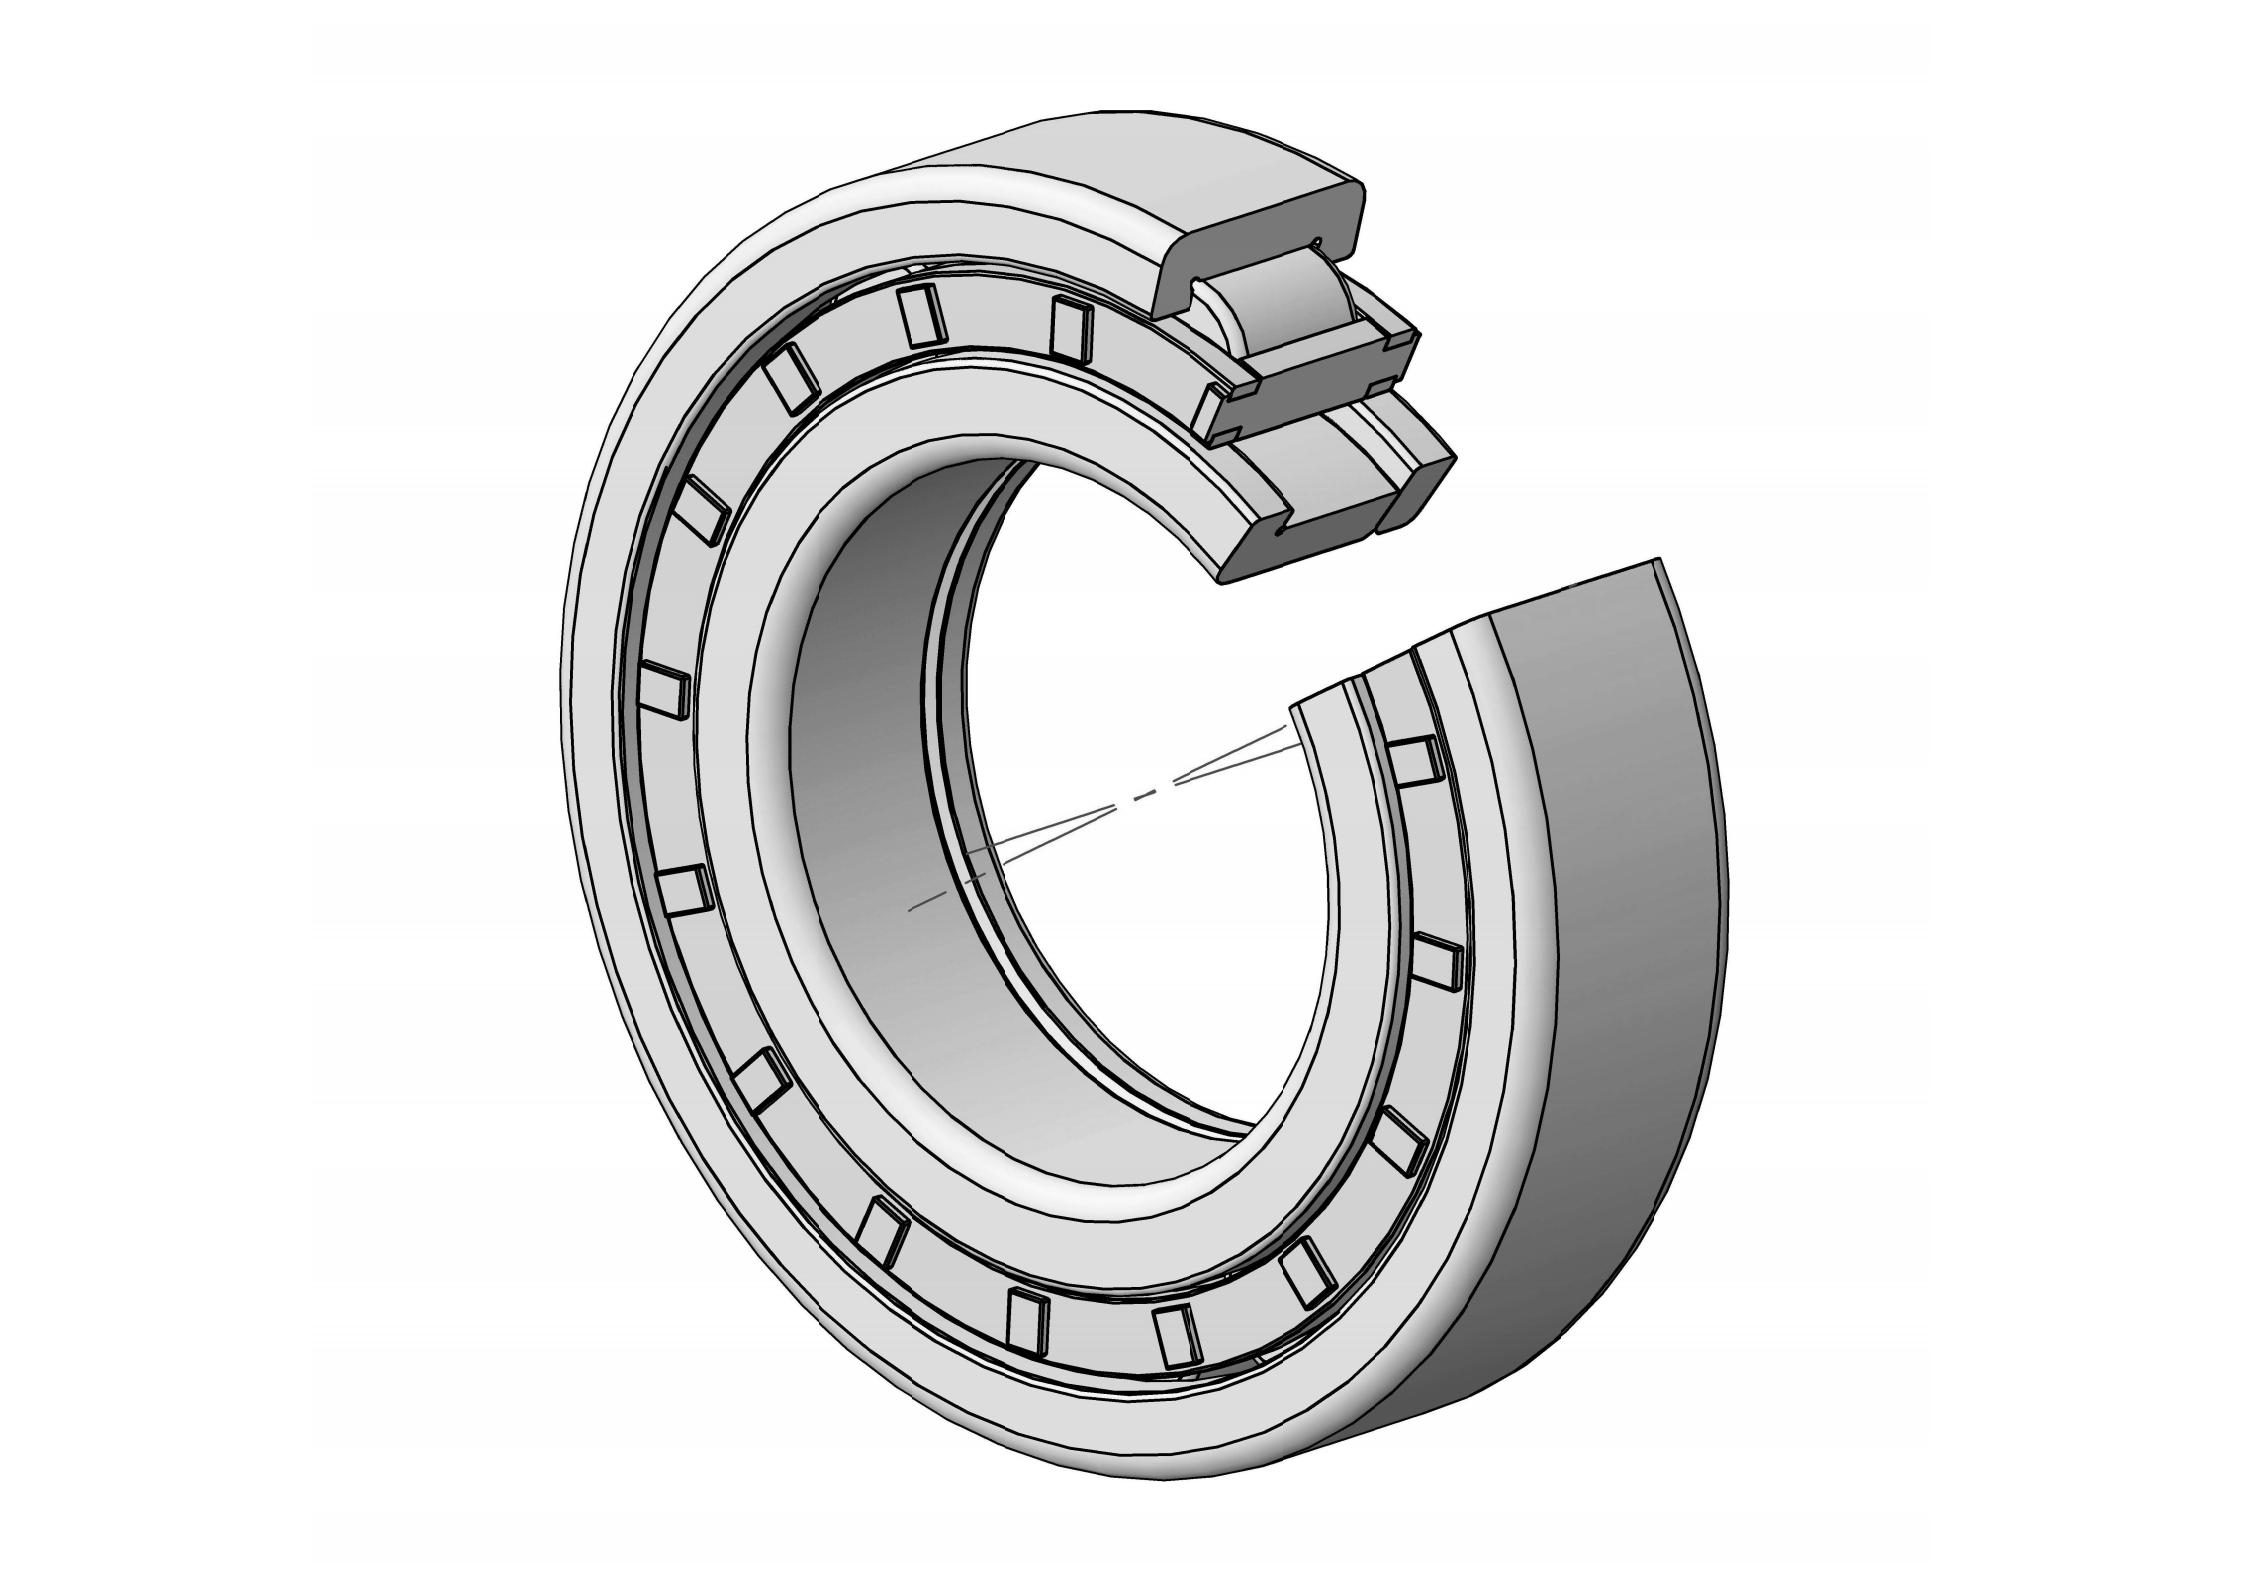 NUP328-EM Single Row Cylindrical roller bearing 